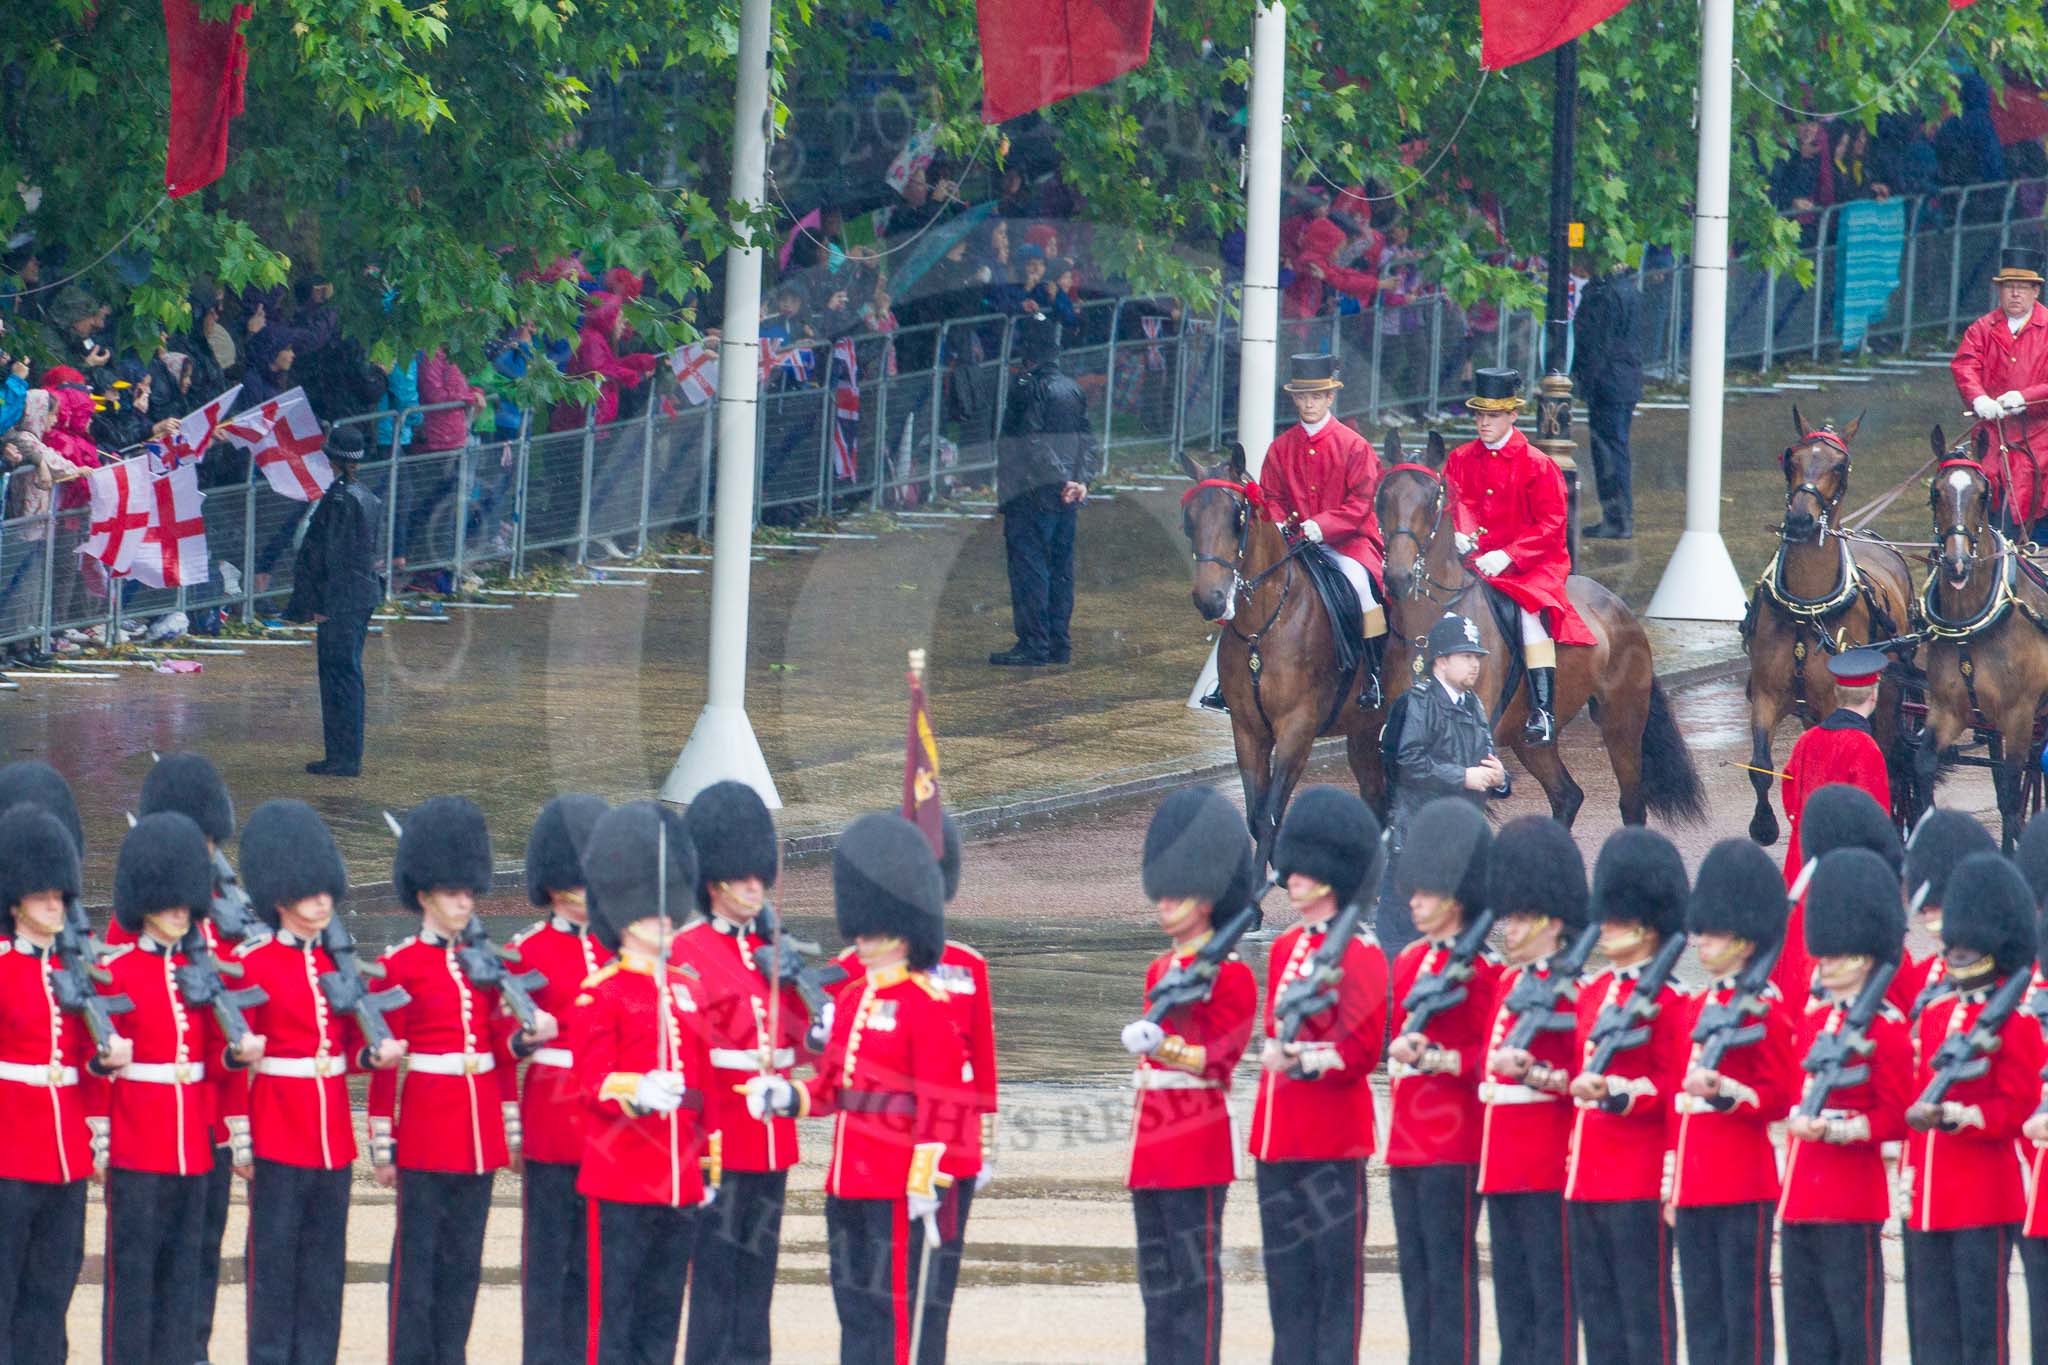 The Colonel's Review 2014.
Horse Guards Parade, Westminster,
London,

United Kingdom,
on 07 June 2014 at 10:50, image #197